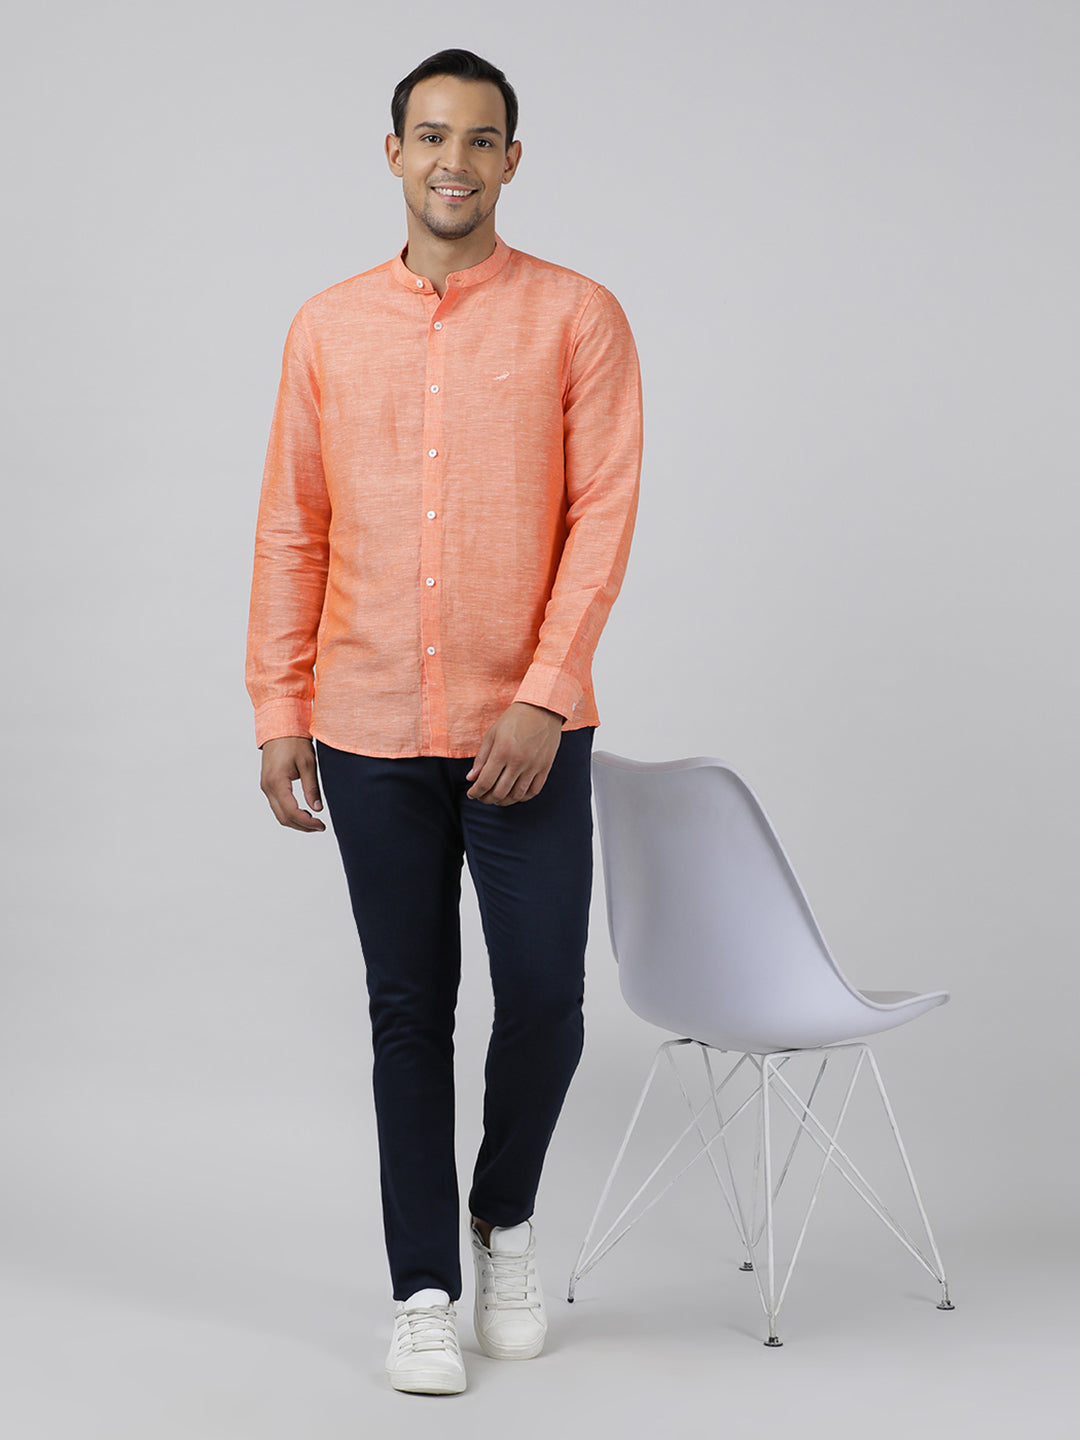 Crocodile Casual Orange Full Sleeve Regular Fit Solid Shirt with Collar for Men